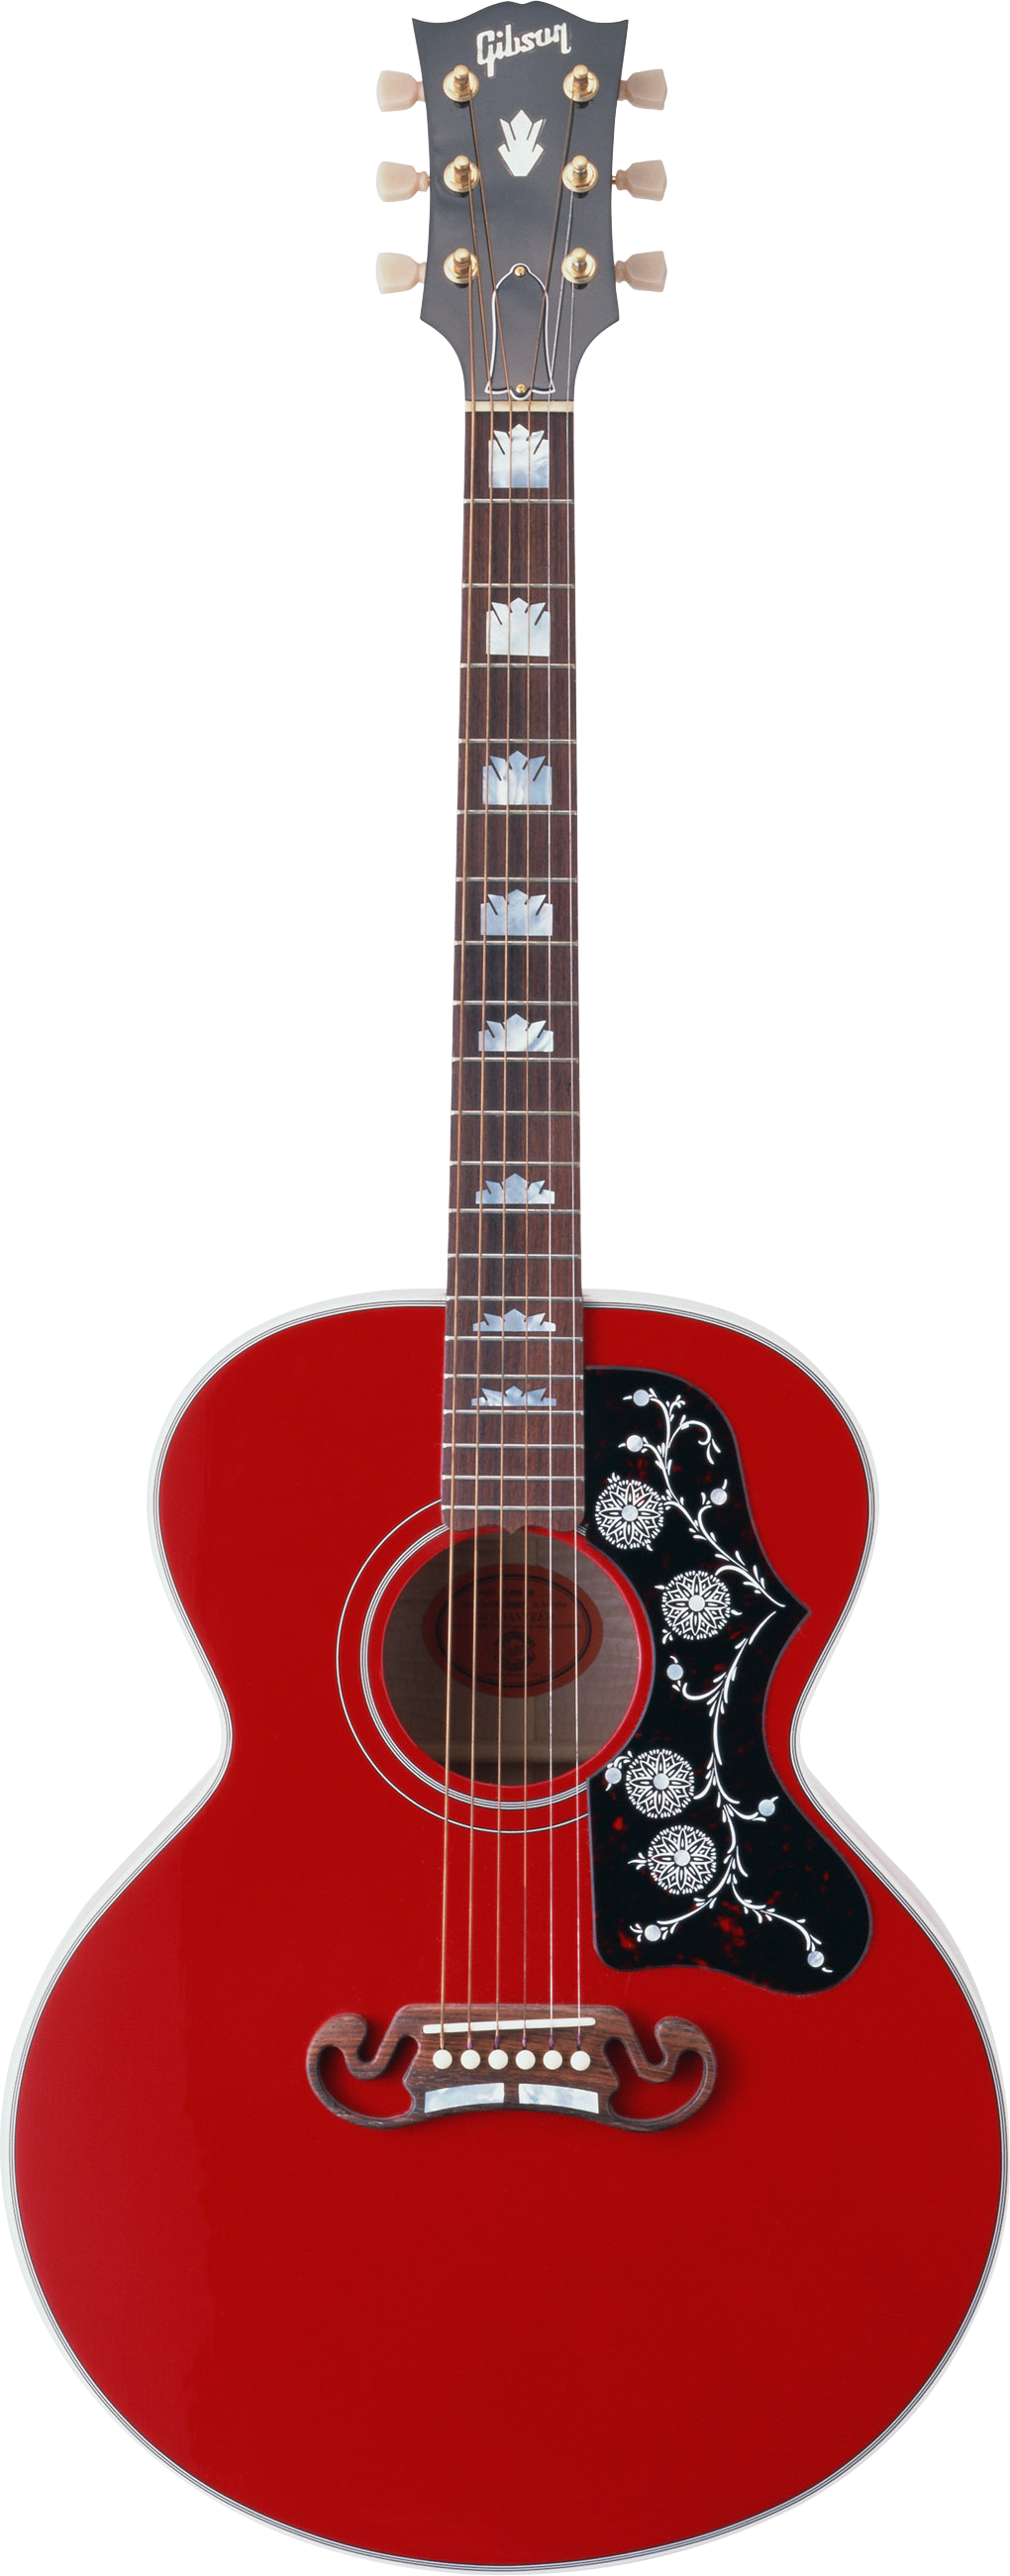 Guitar Music Red Free Photo PNG Image